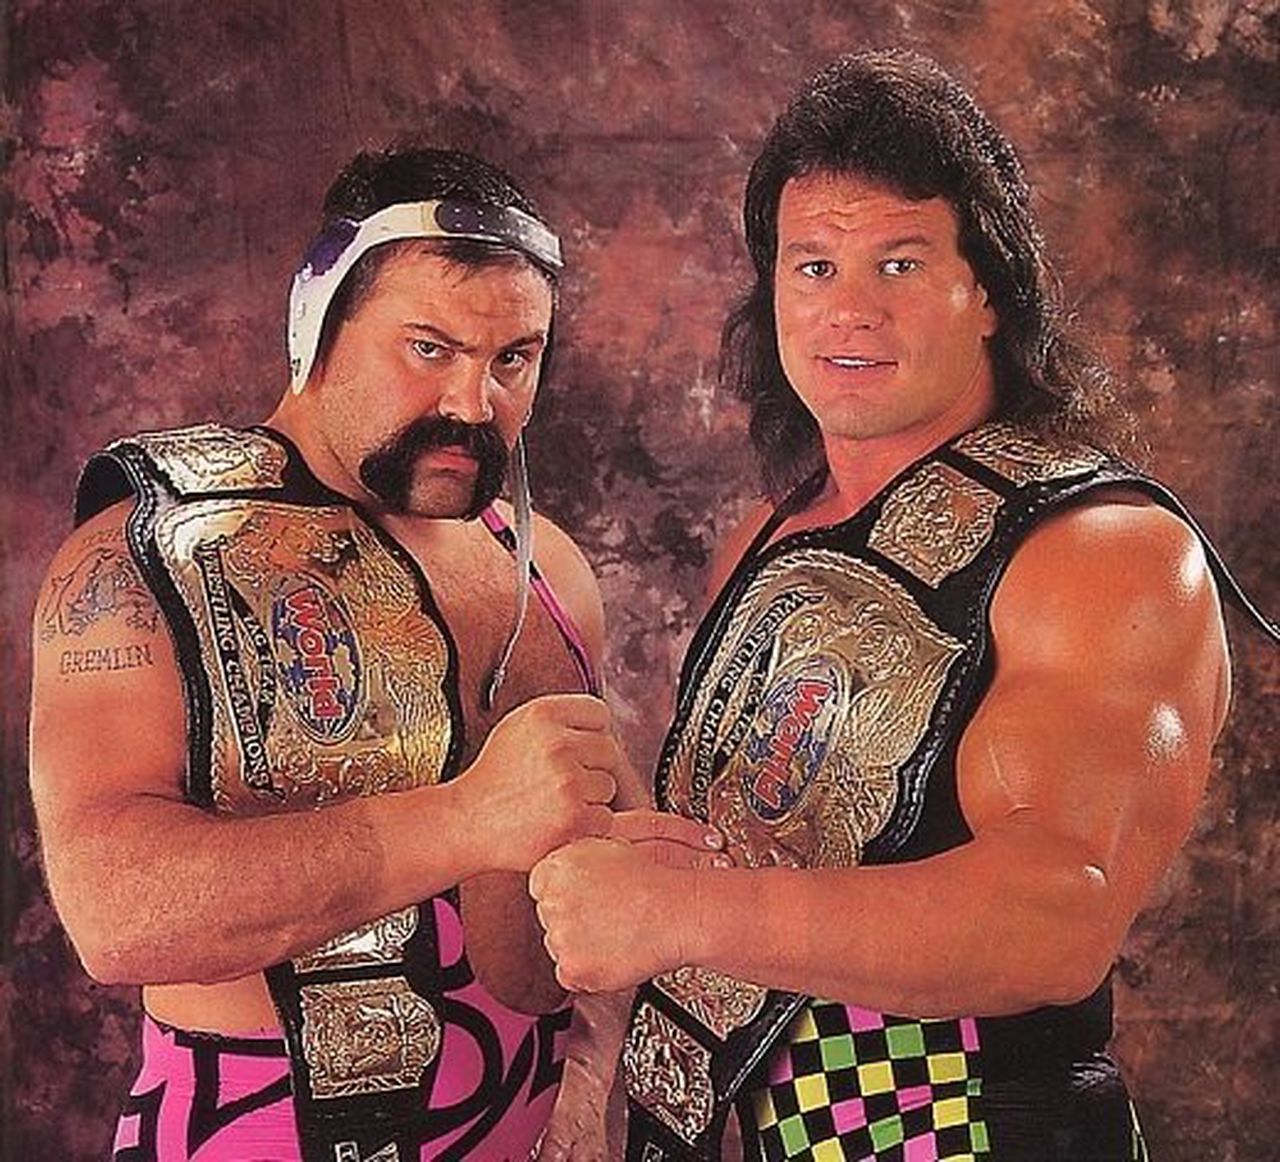 WWE Hall Of Fame 2022: The Steiner Brothers